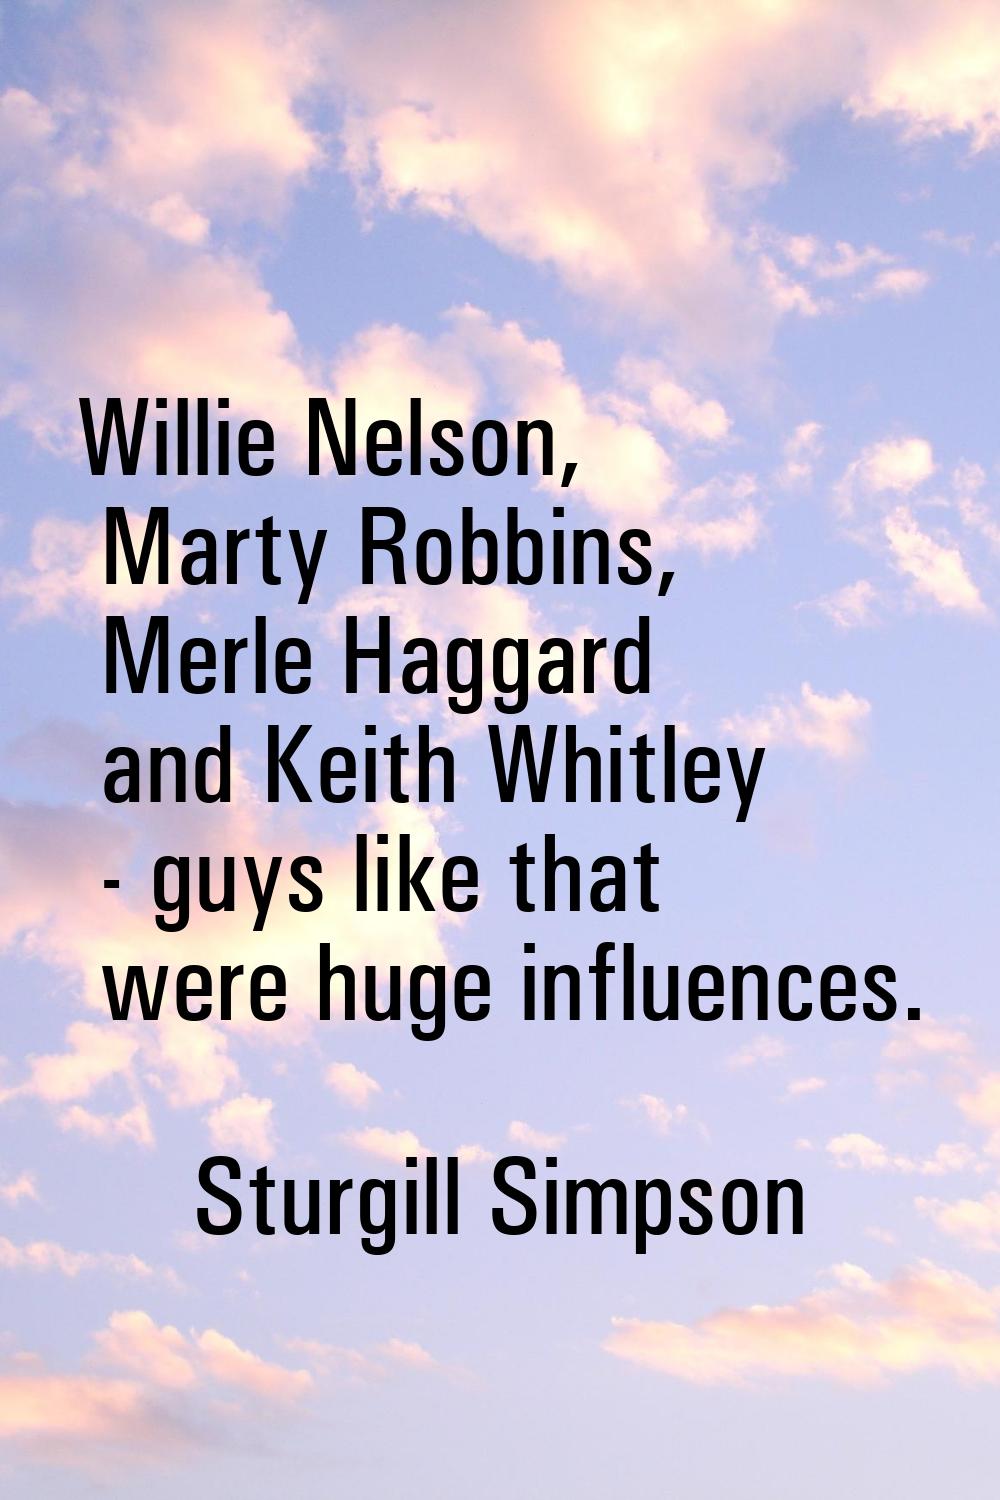 Willie Nelson, Marty Robbins, Merle Haggard and Keith Whitley - guys like that were huge influences